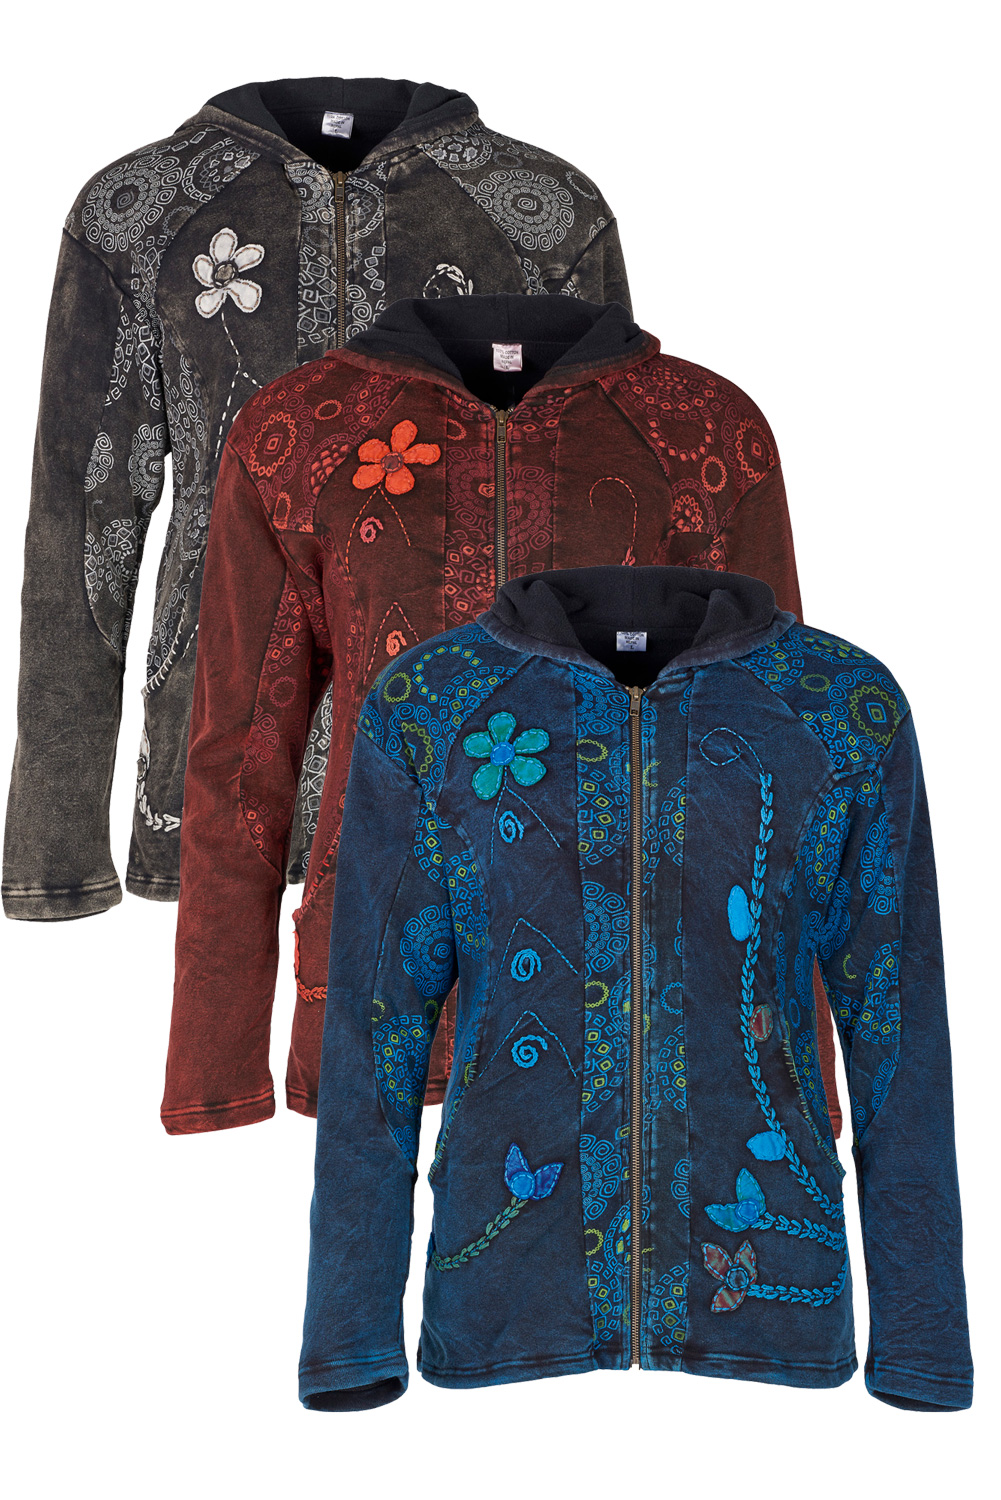 Fleece lined hooded jacket with applique